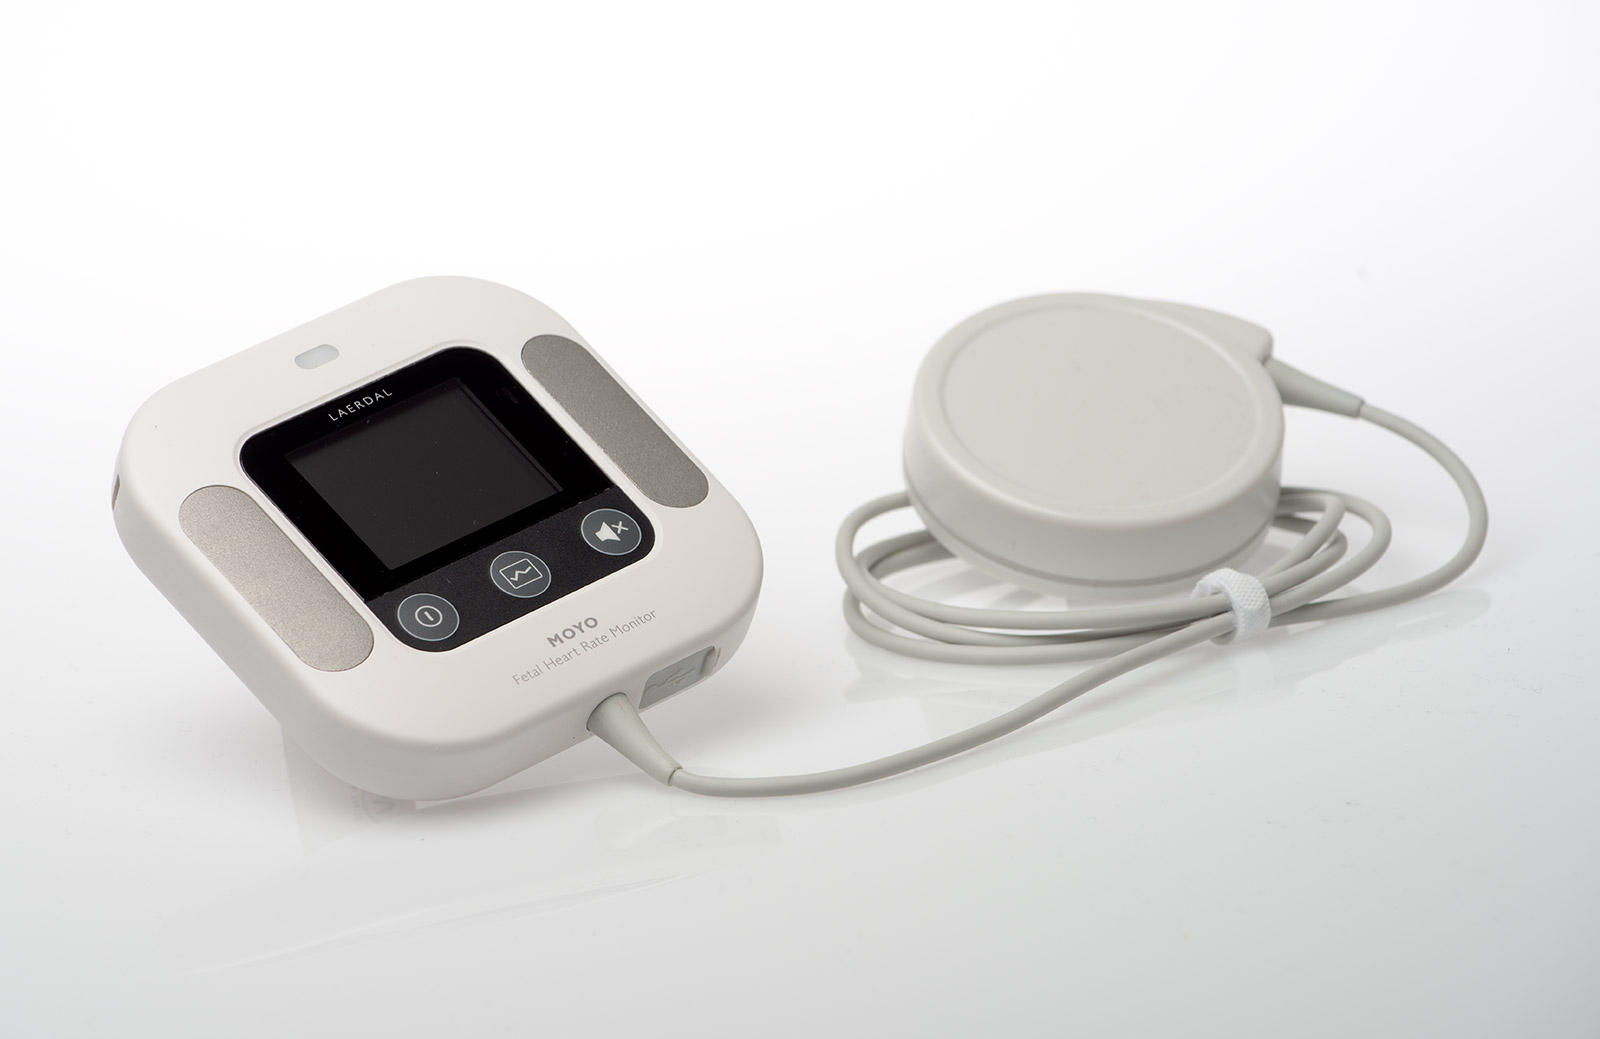 fetal heart rate monitoring device